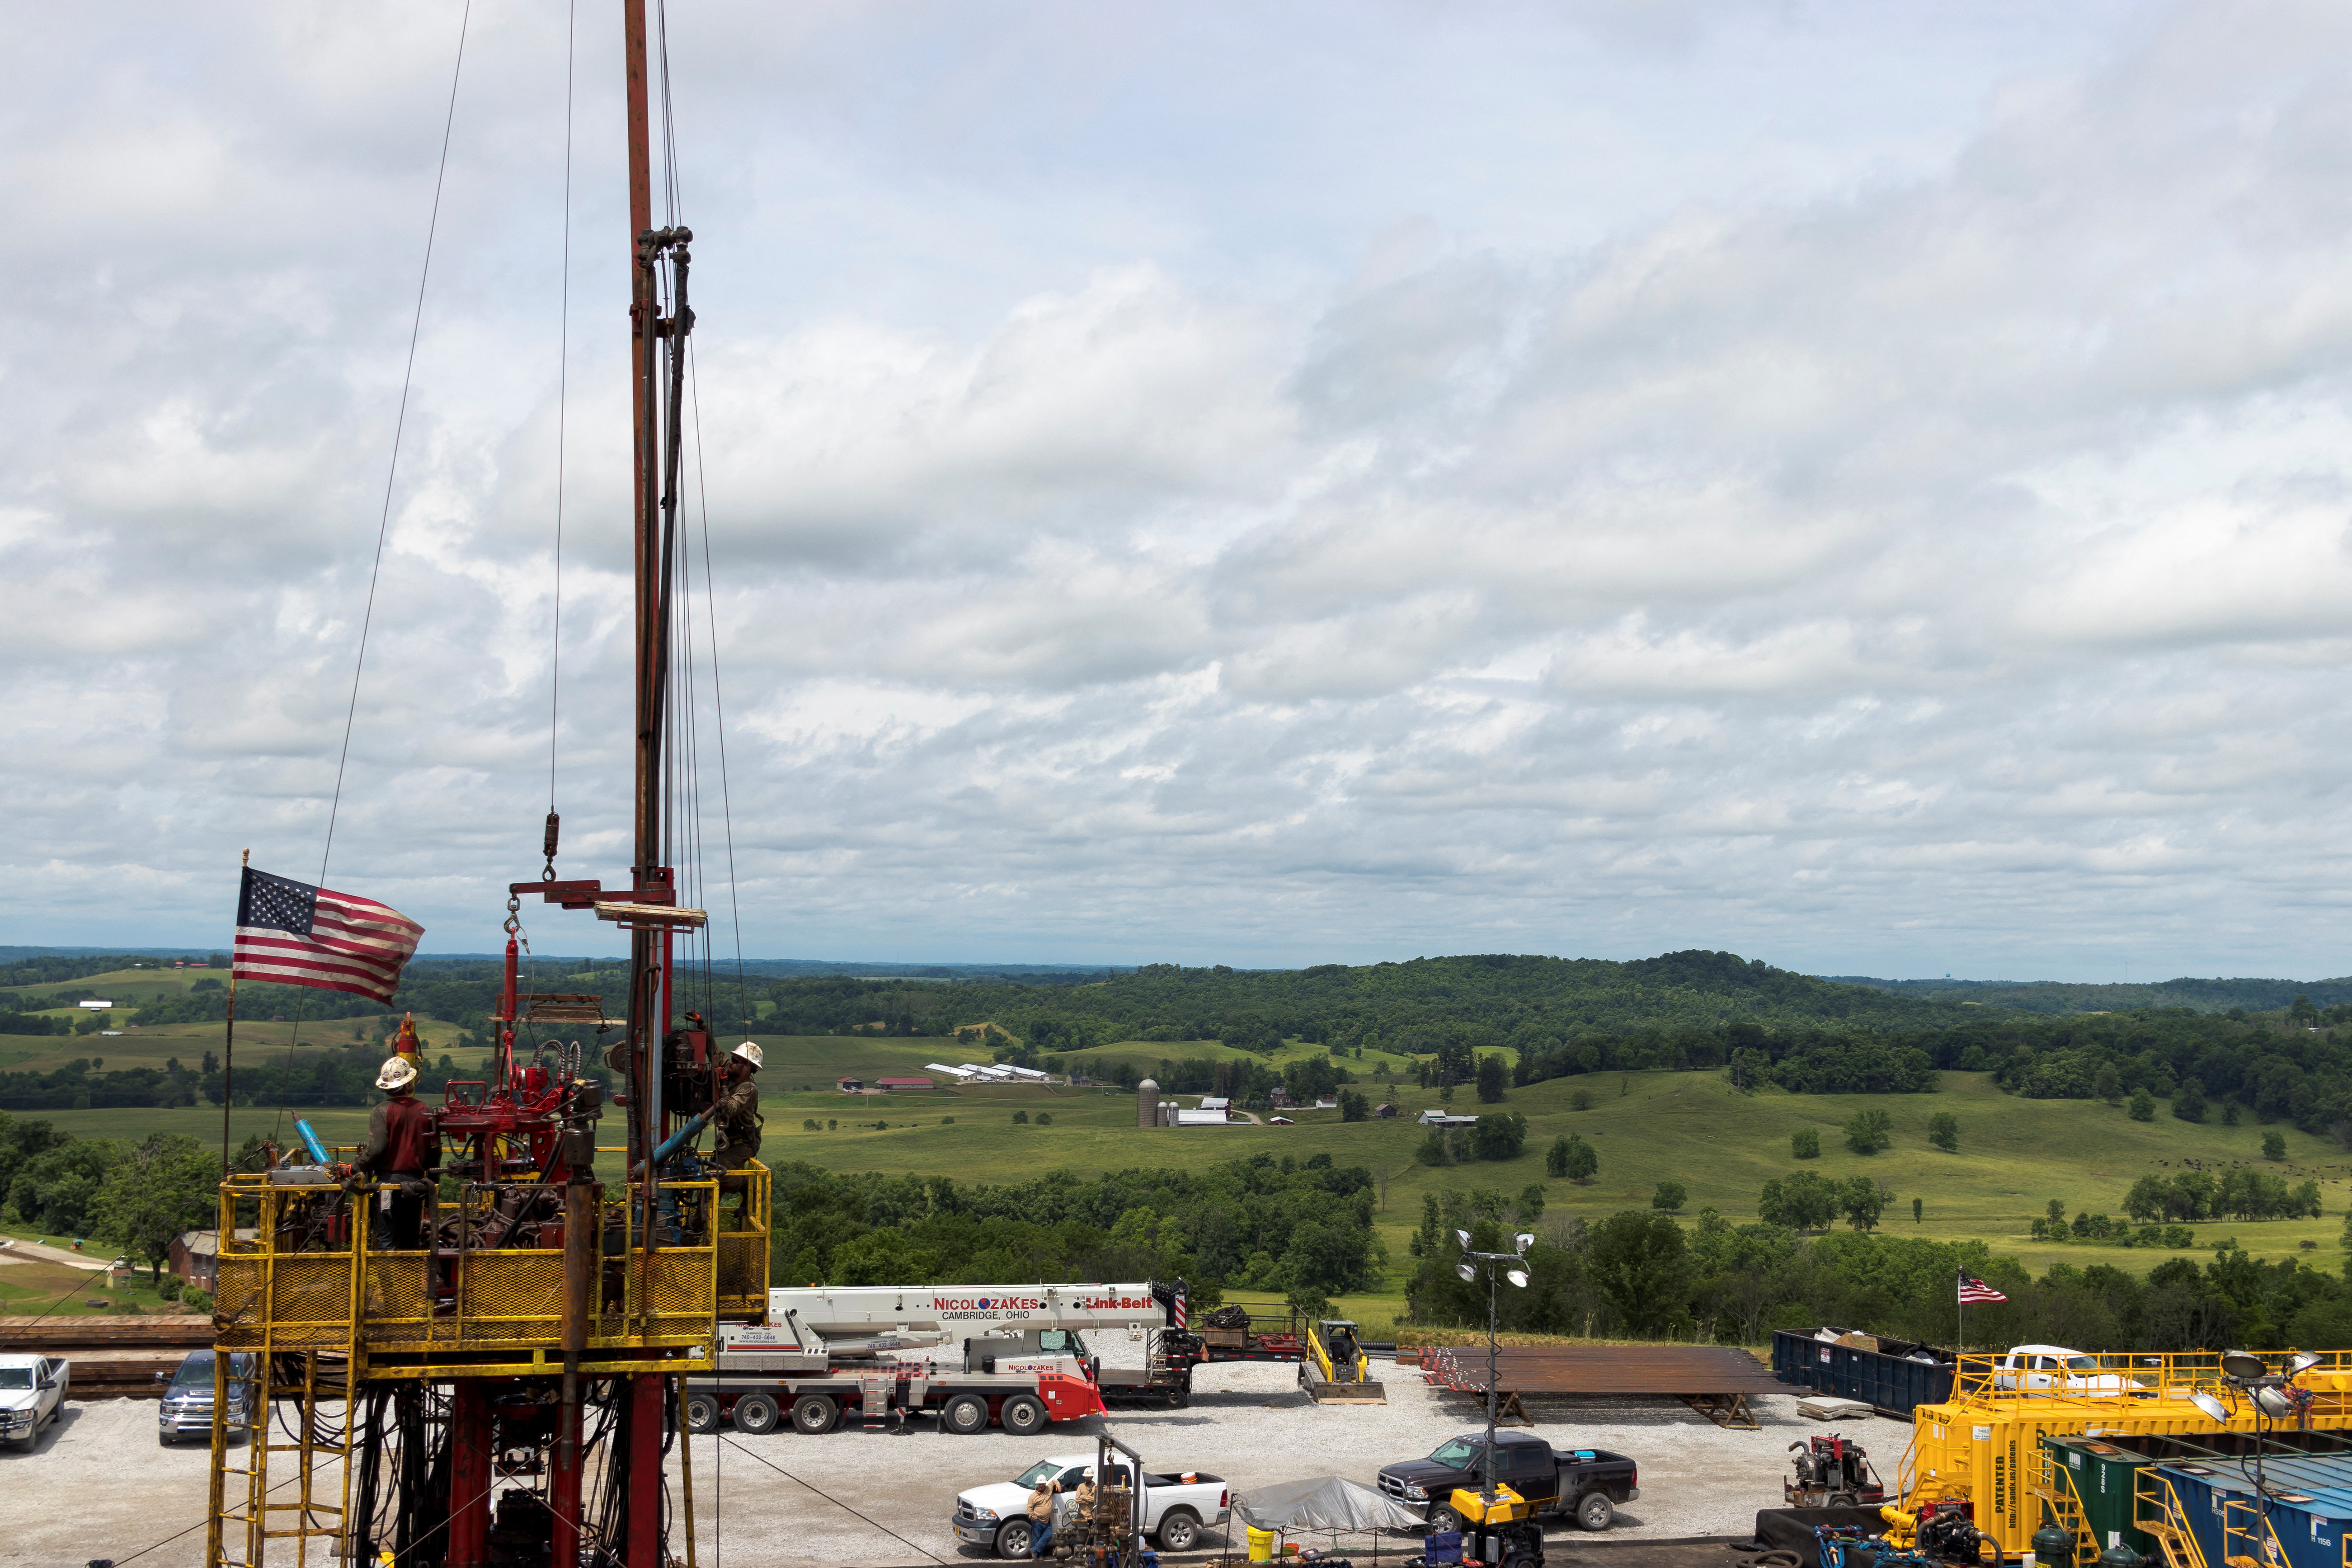 DWS Hydraulic Completion Unit (HCU) crew performs a Natural Gas drill-out operation on a well location in Ohio's Utica Shale Basin